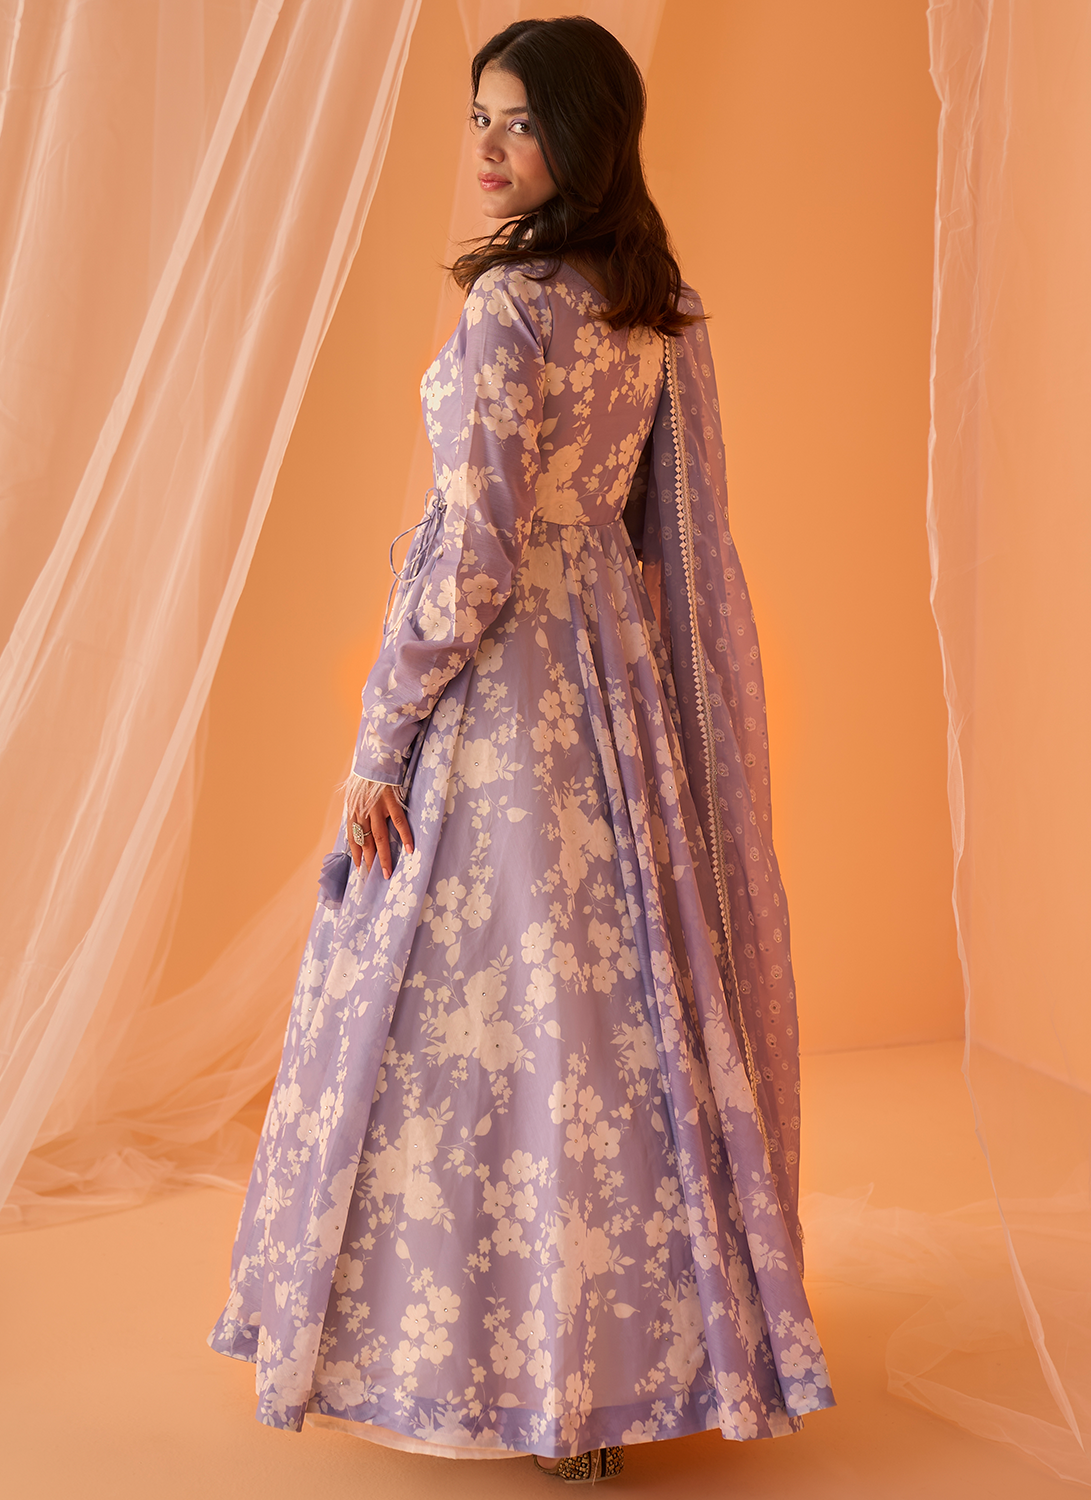 Dusty Periwinkle White Floral Printed Anarkali